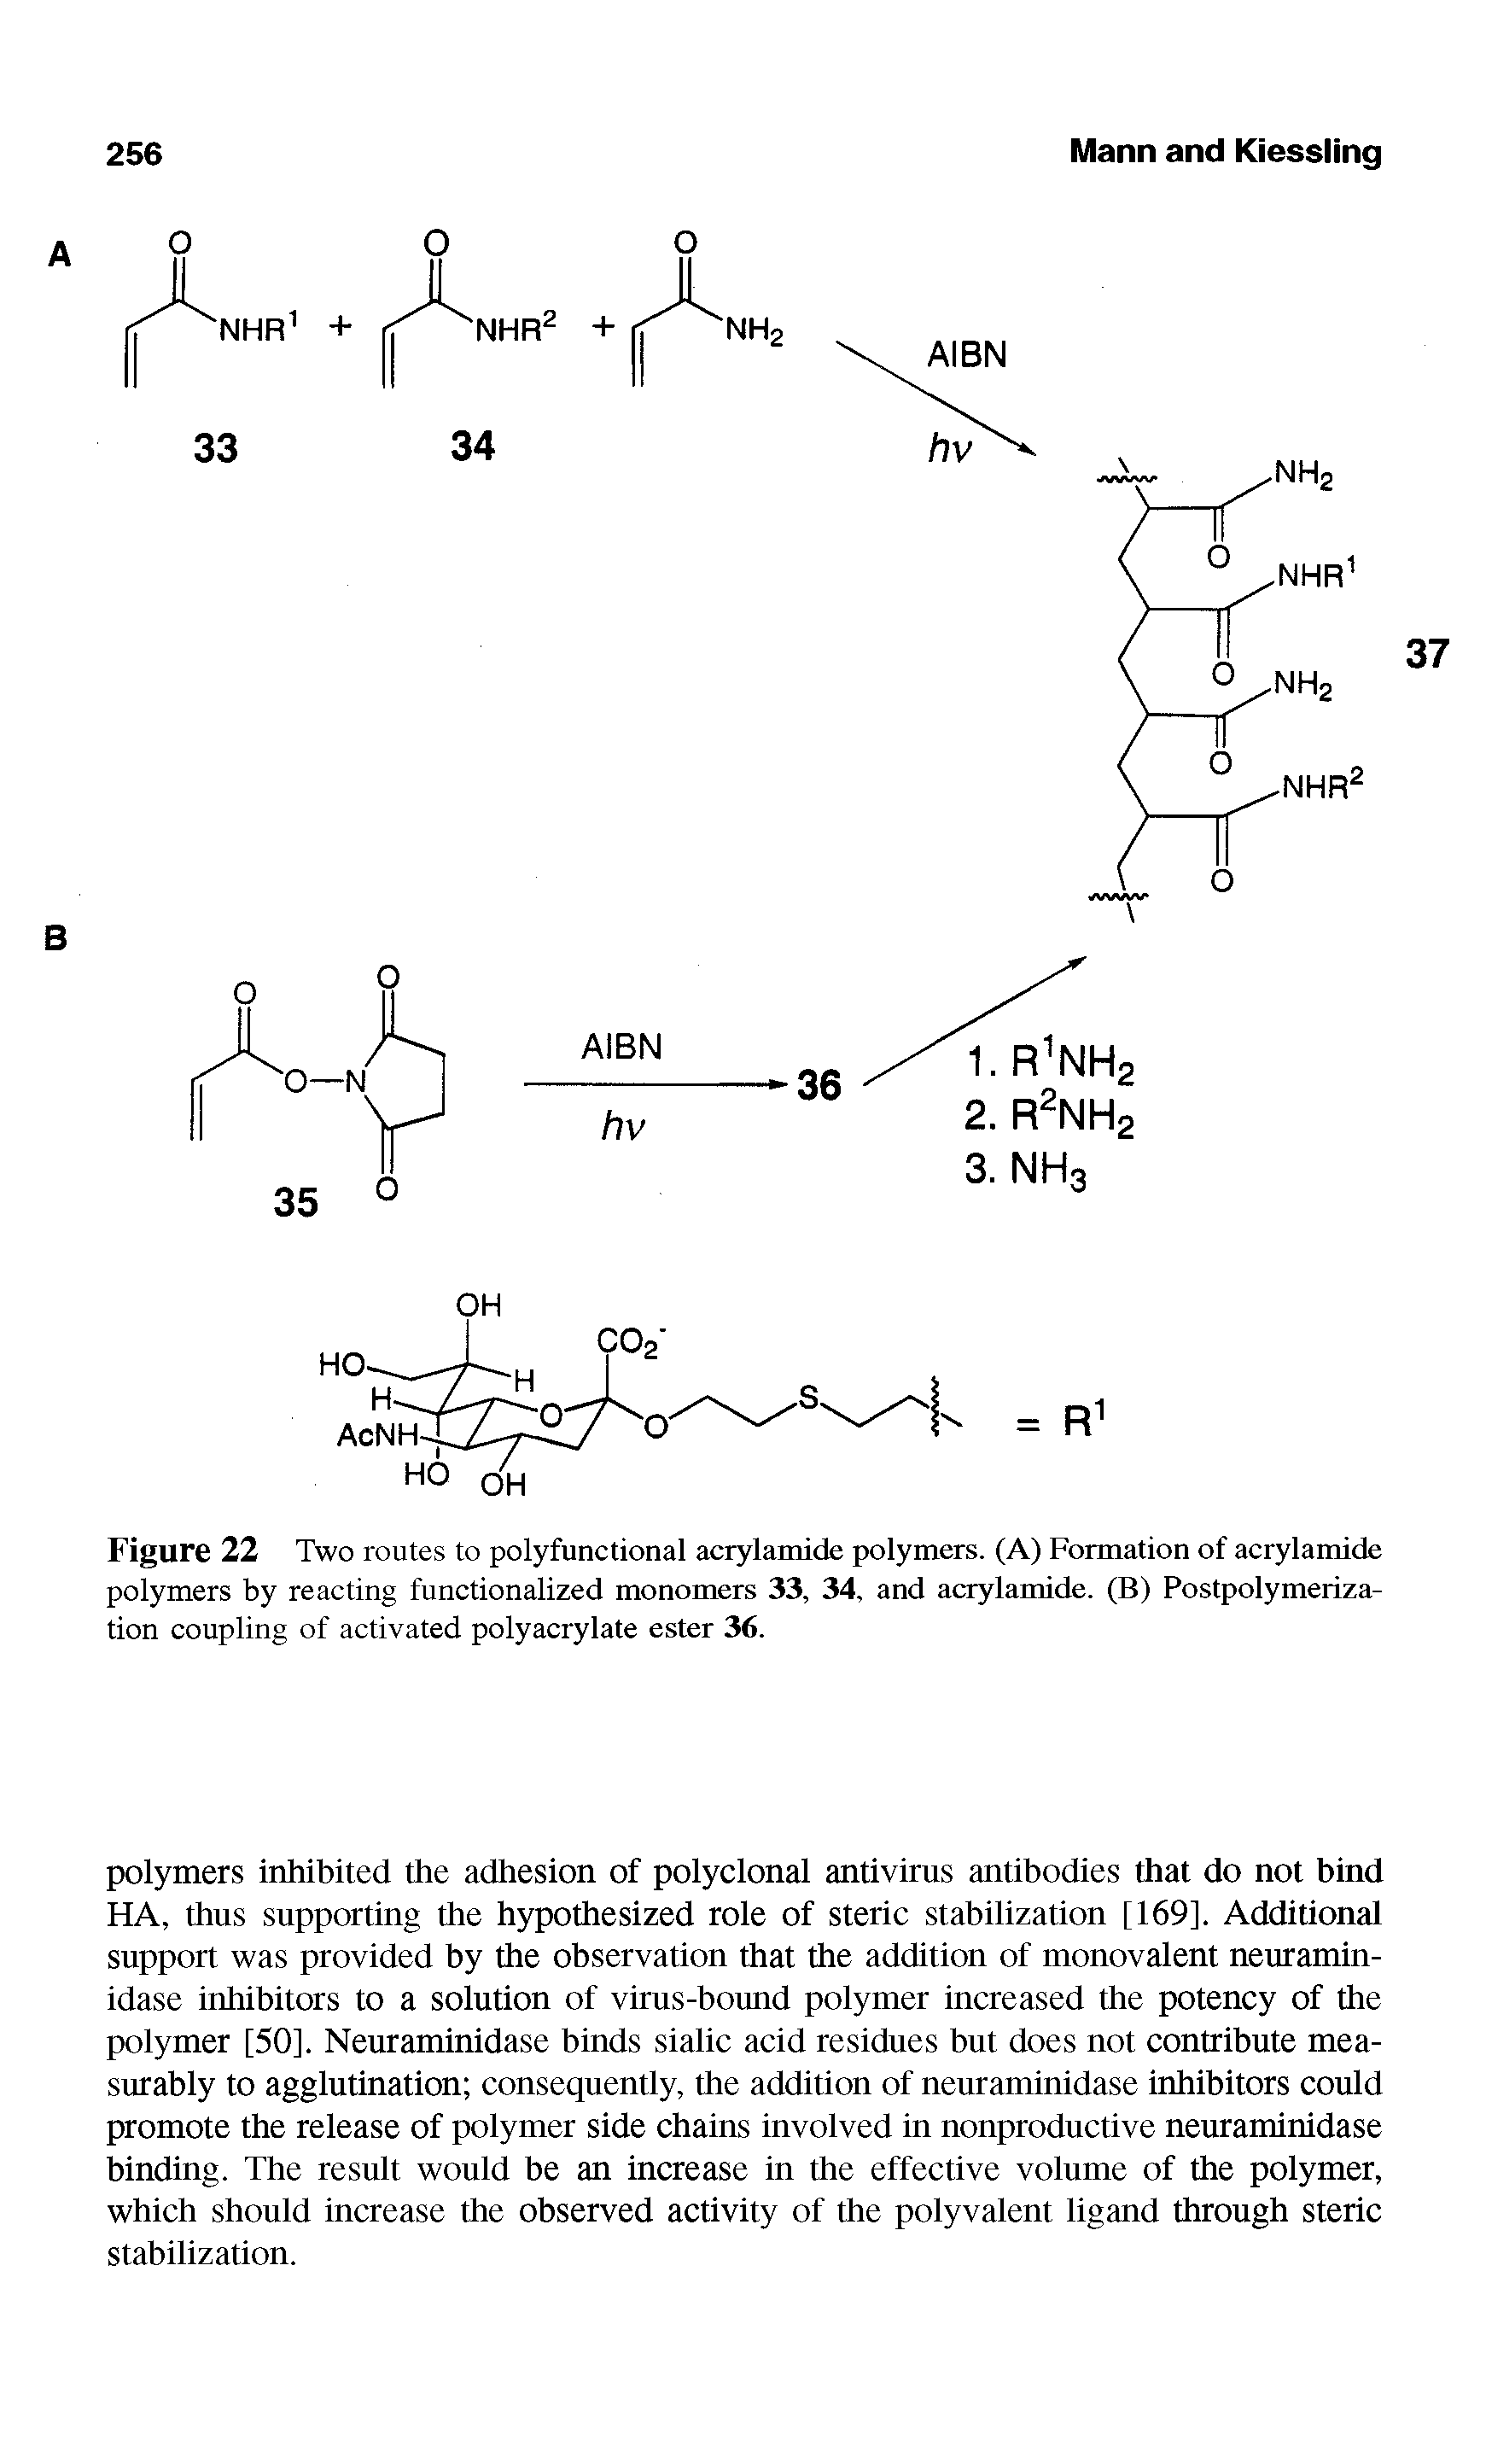 Figure 22 Two routes to polyfunctional acrylamide polymers. (A) Formation of acrylamide polymers by reacting functionalized monomers 33, 34, and acrylamide. (B) Postpolymerization coupling of activated polyacrylate ester 36.